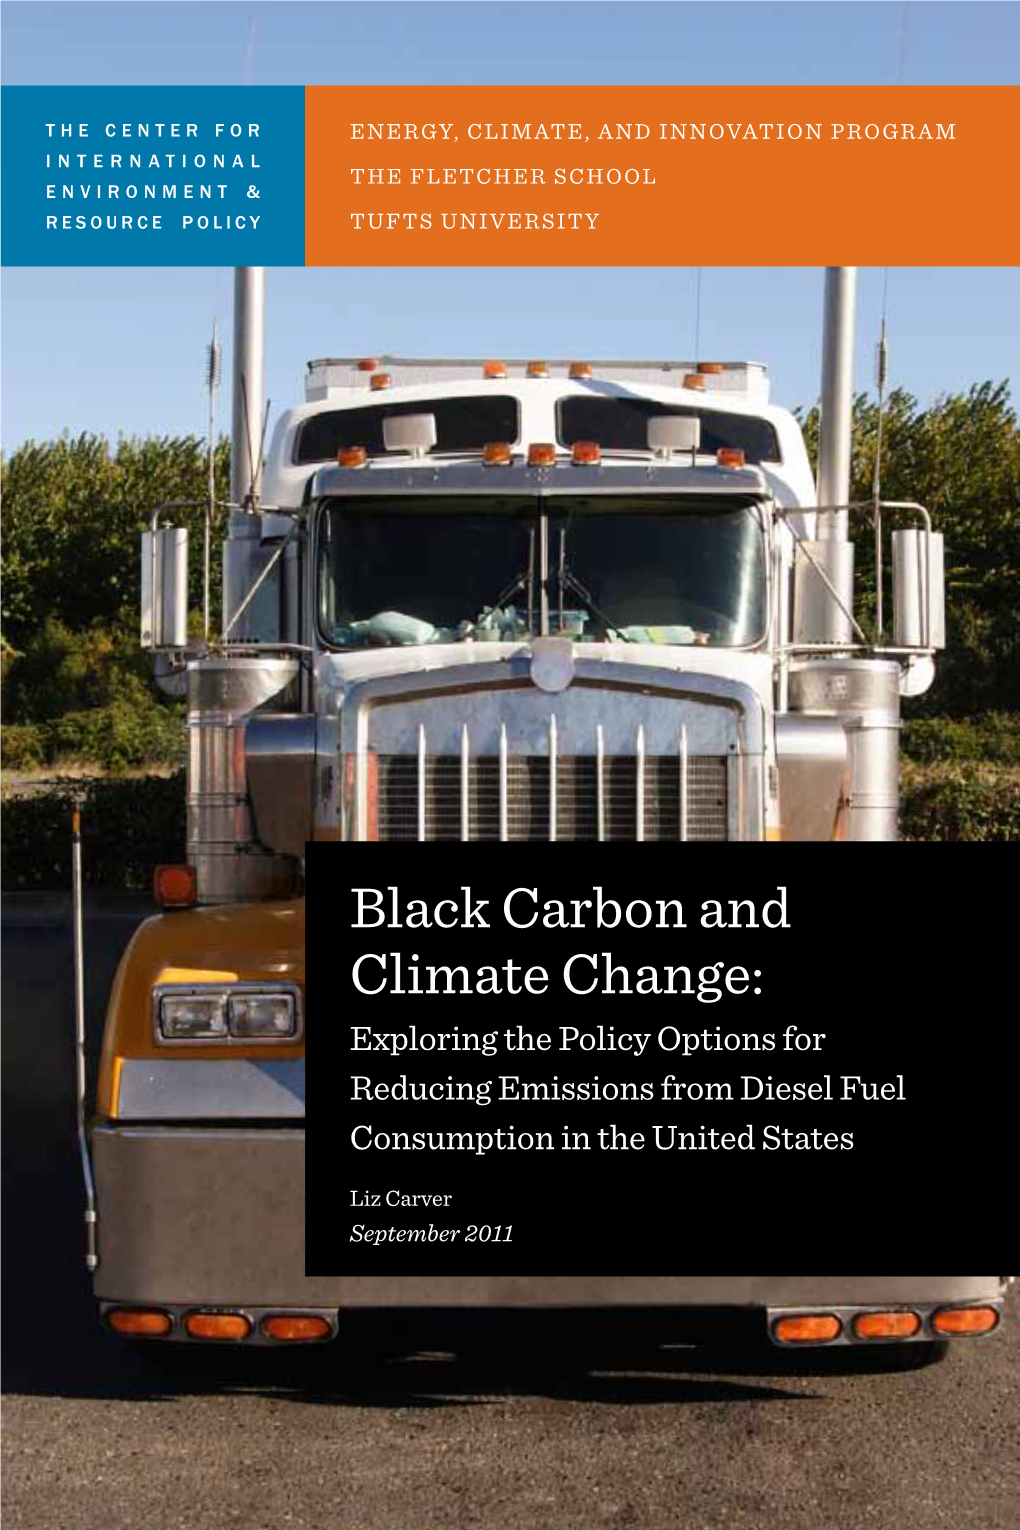 Black Carbon and Climate Change: Exploring the Policy Options for Reducing Emissions from Diesel Fuel Consumption in the United States